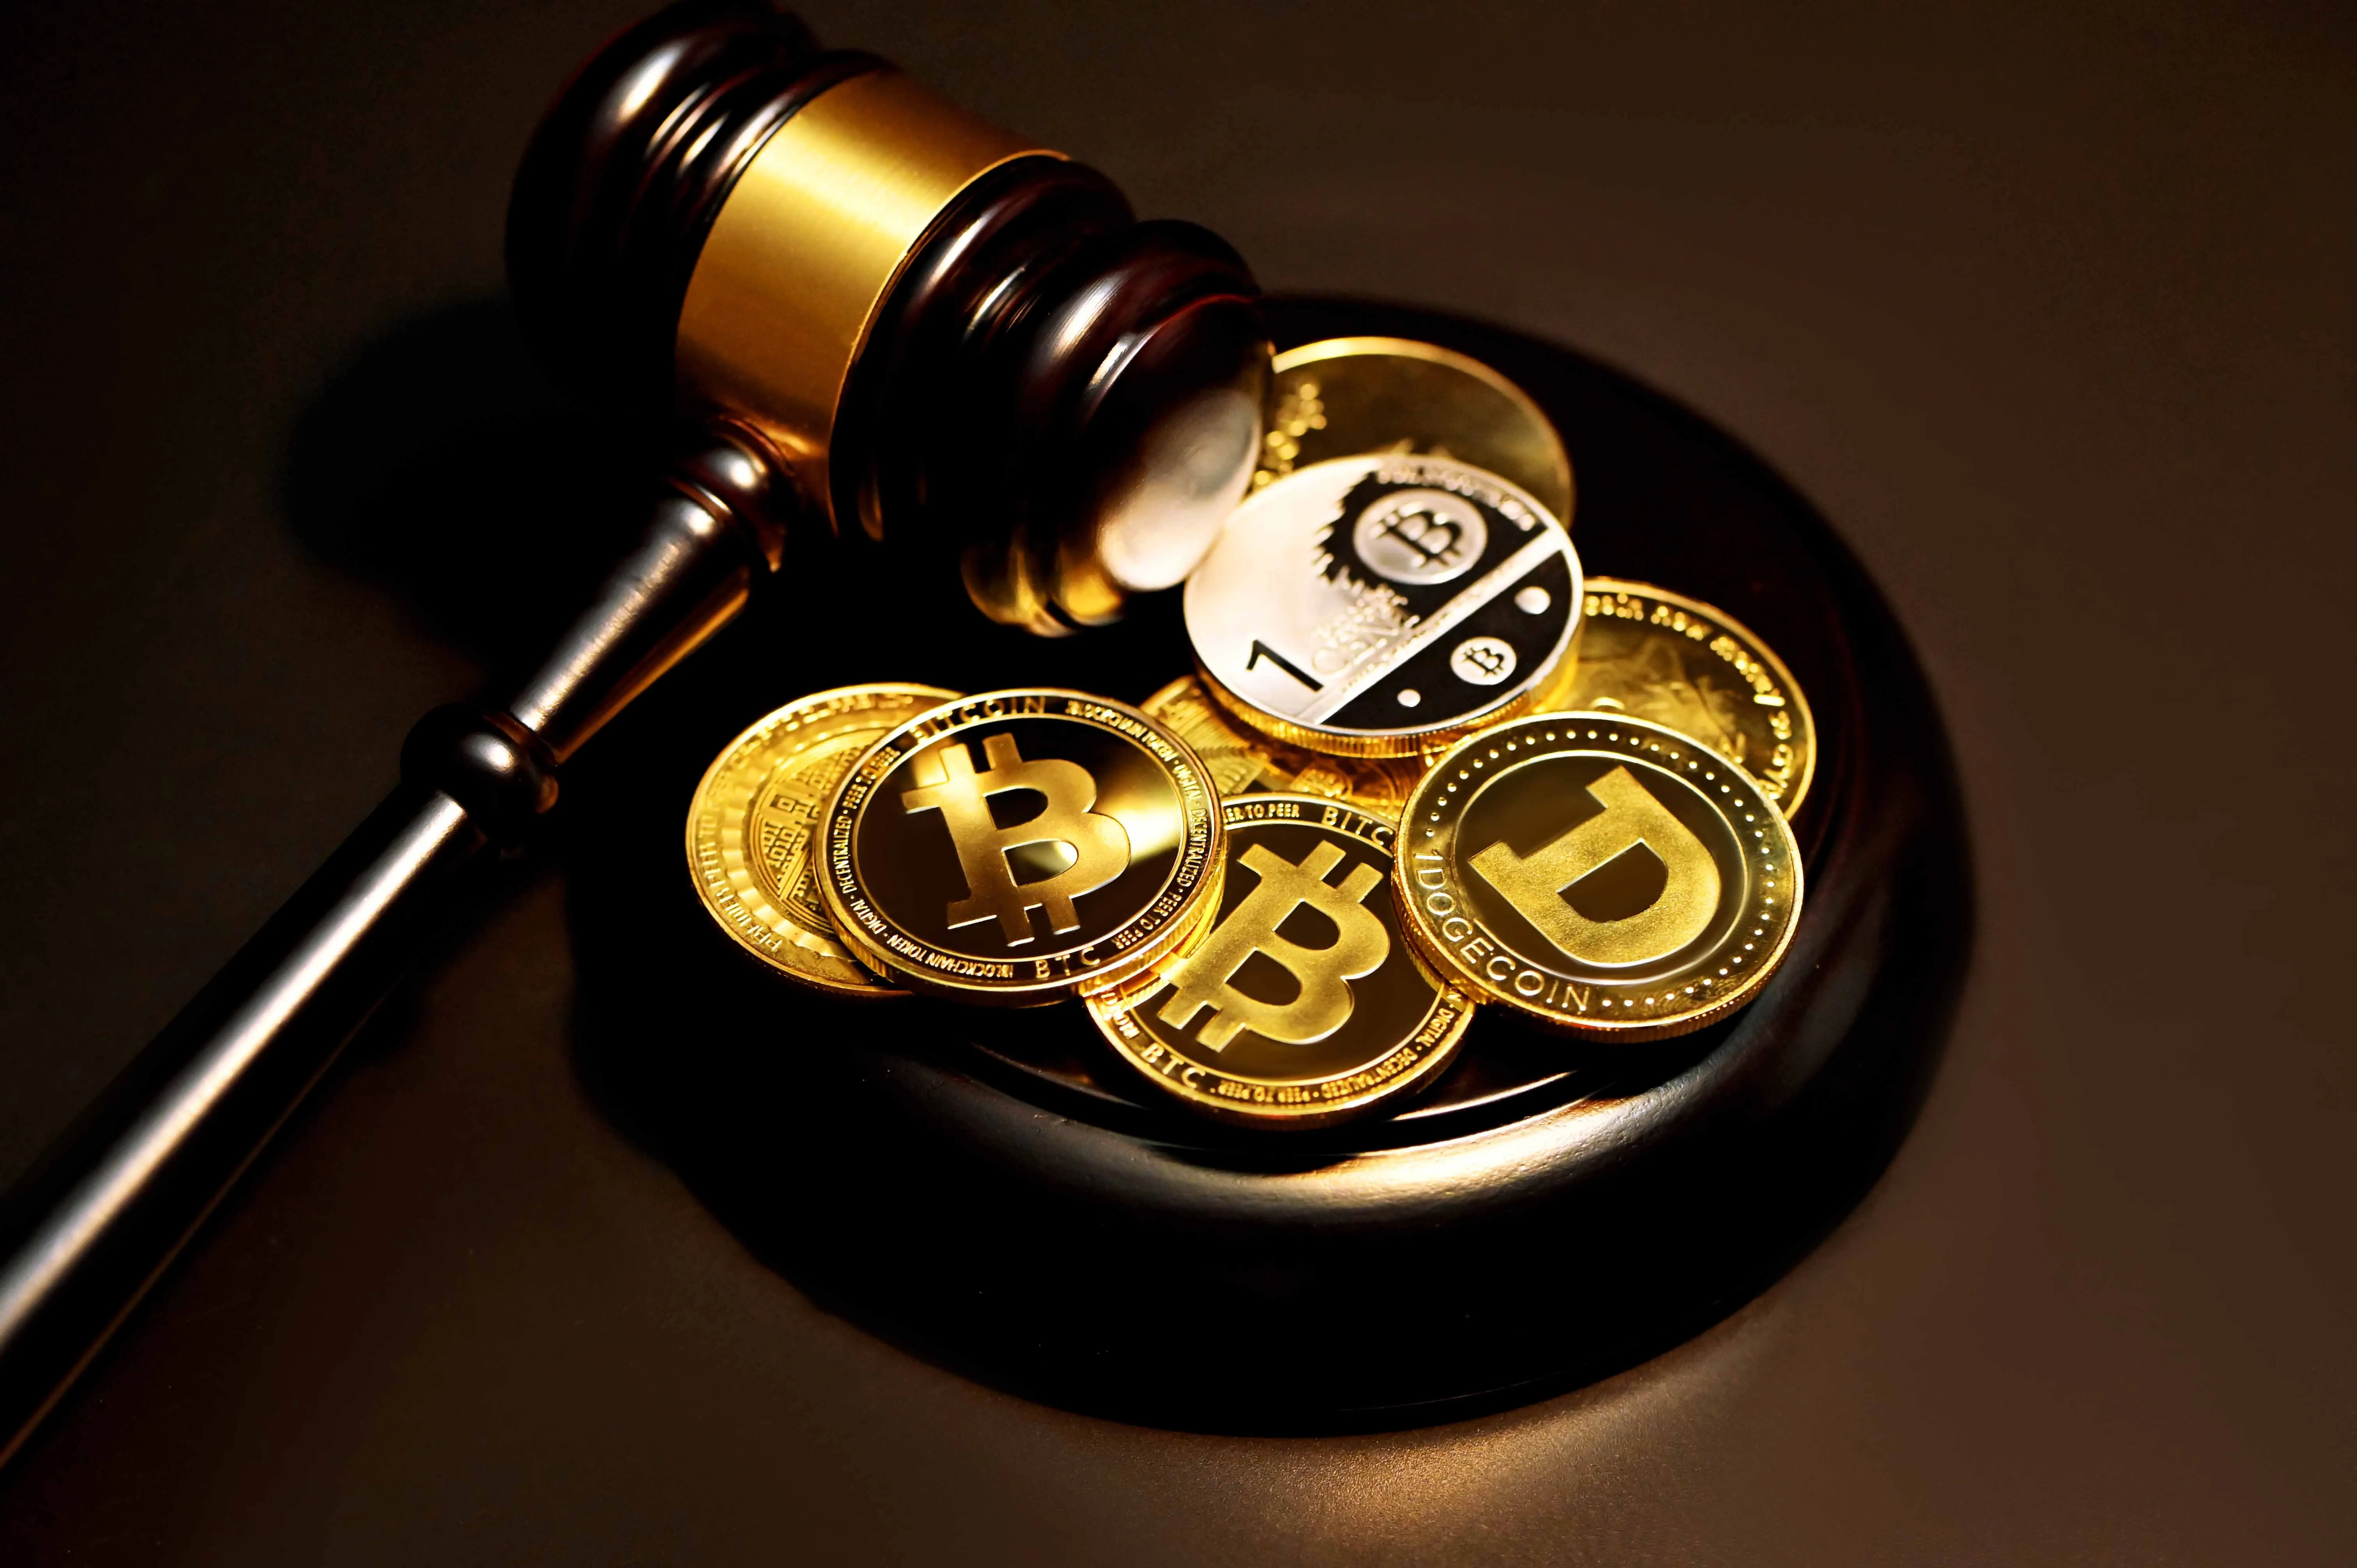 coins with symbols of popular cryptocurrencies next to a judge gavel